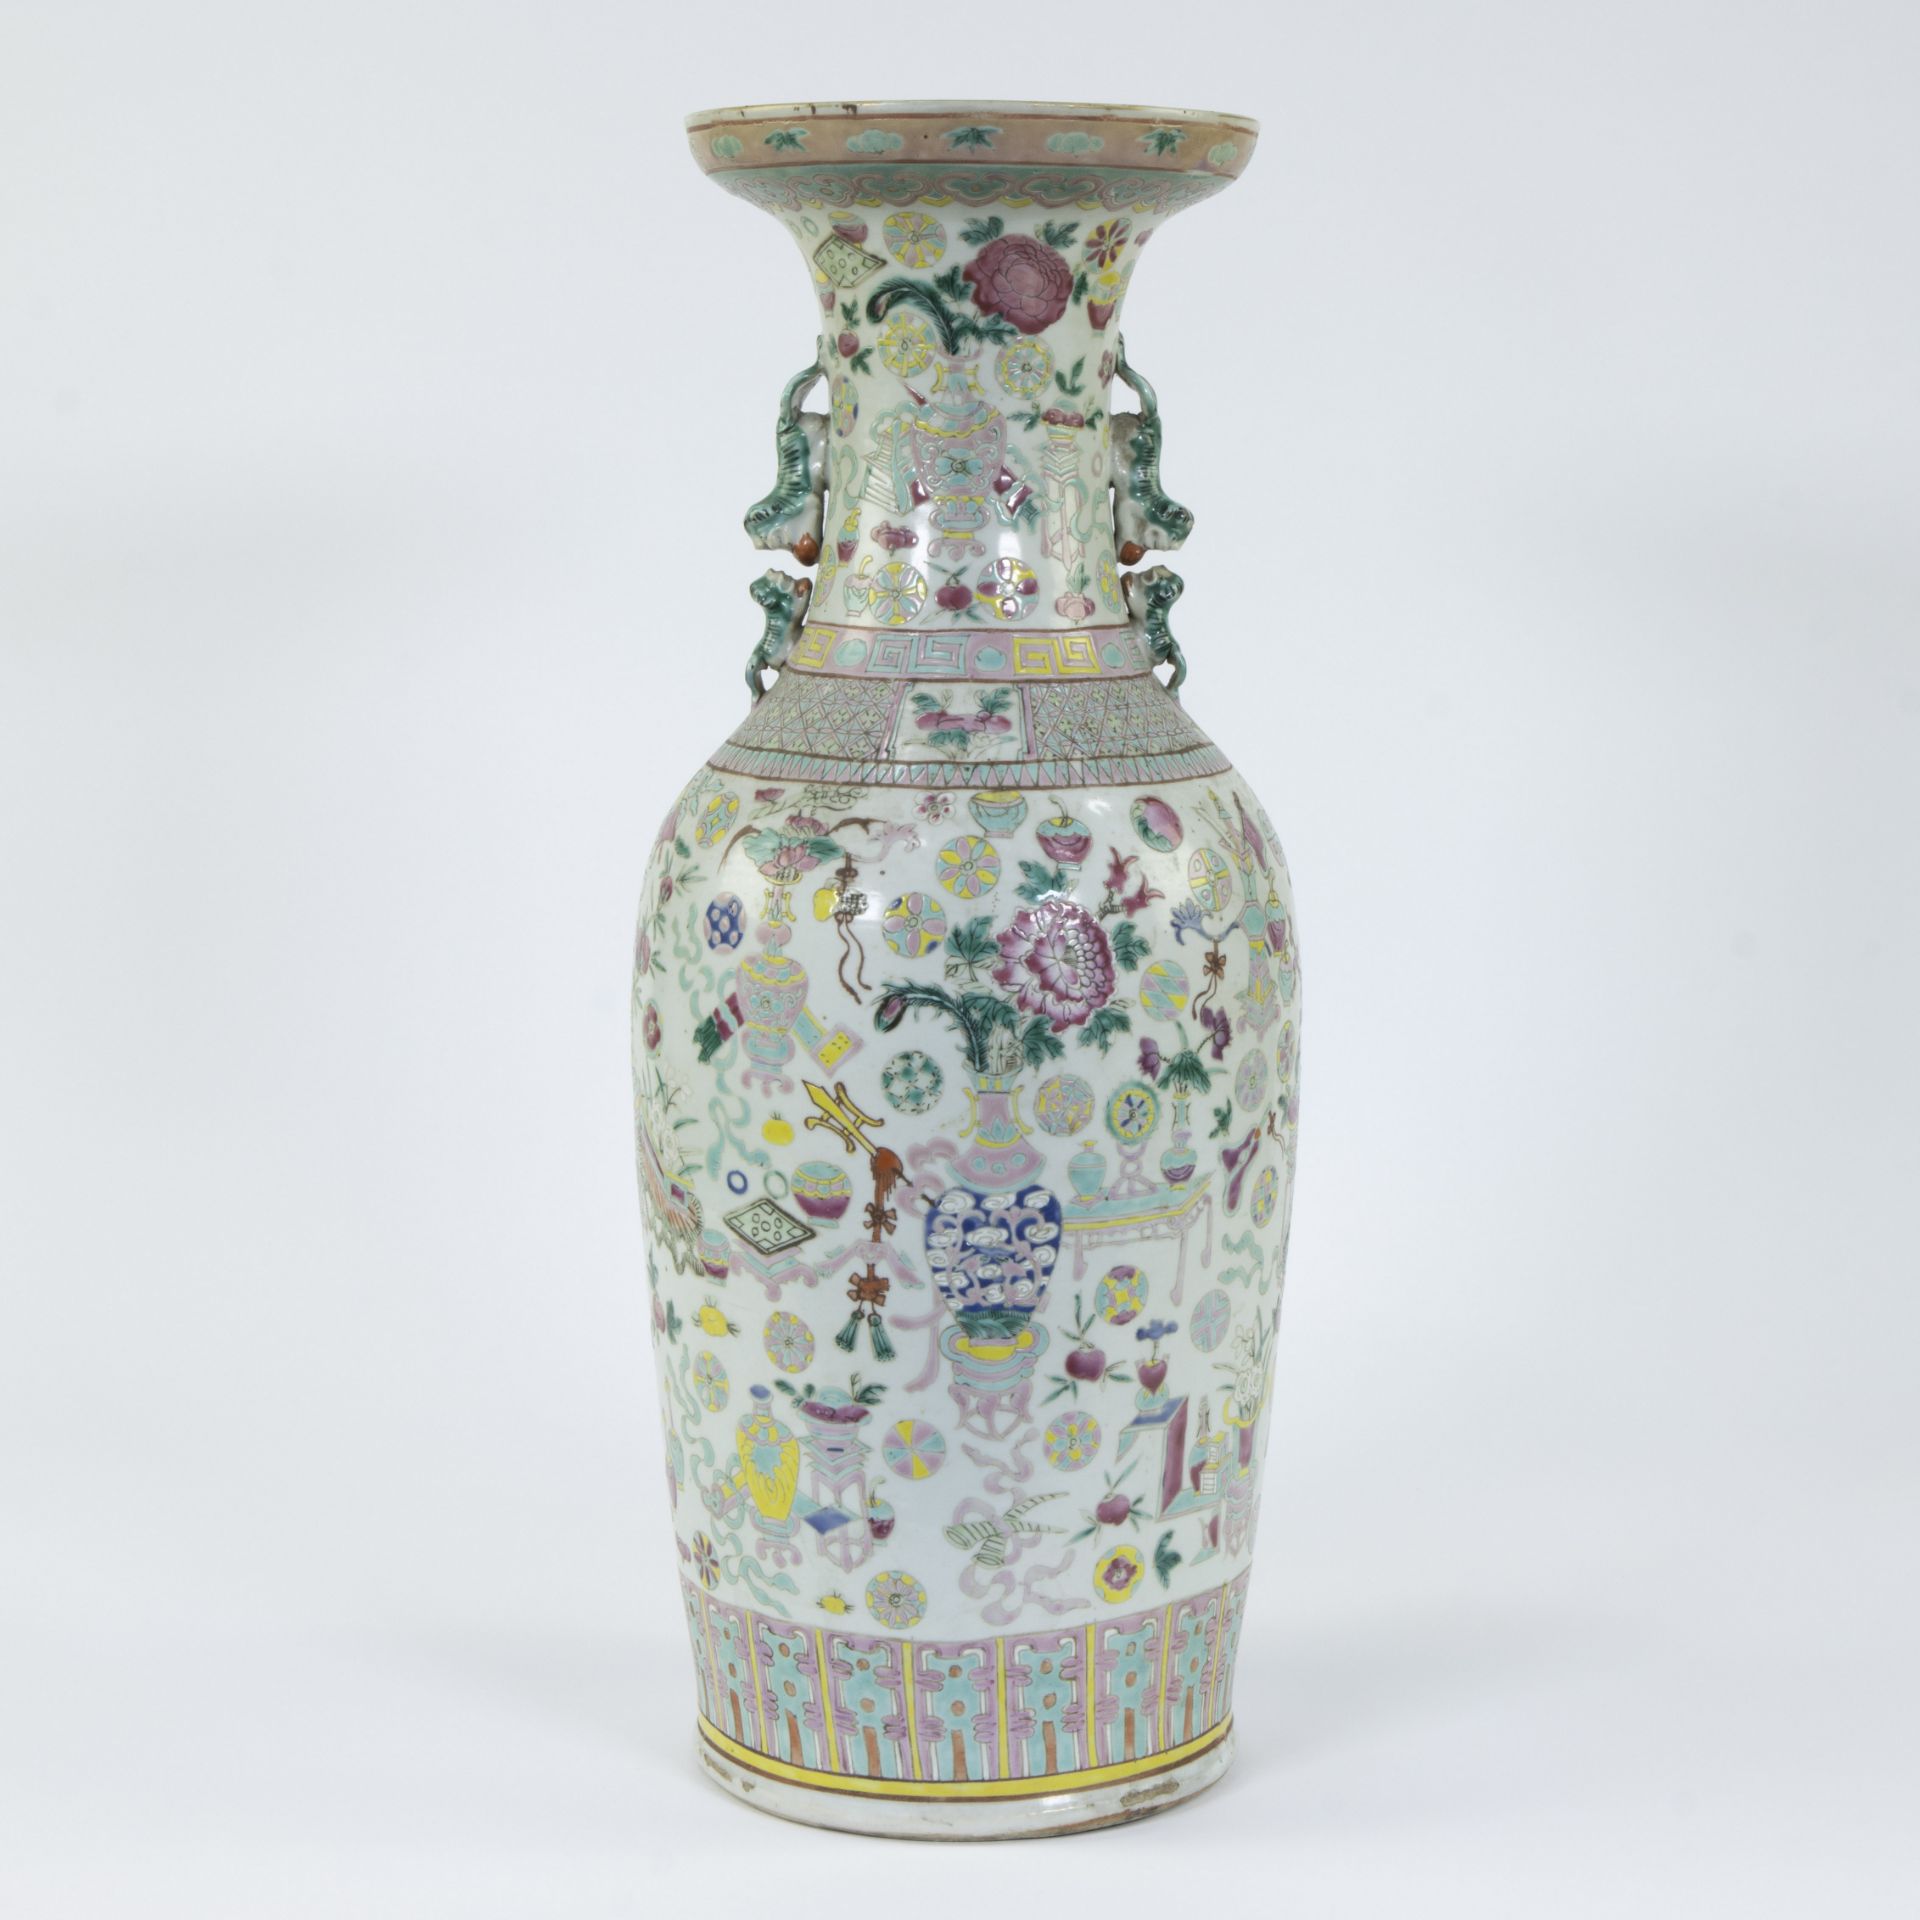 Baluster vase in Chinese porcelain with decoration of valuables, famille rose, 19th century - Image 3 of 6